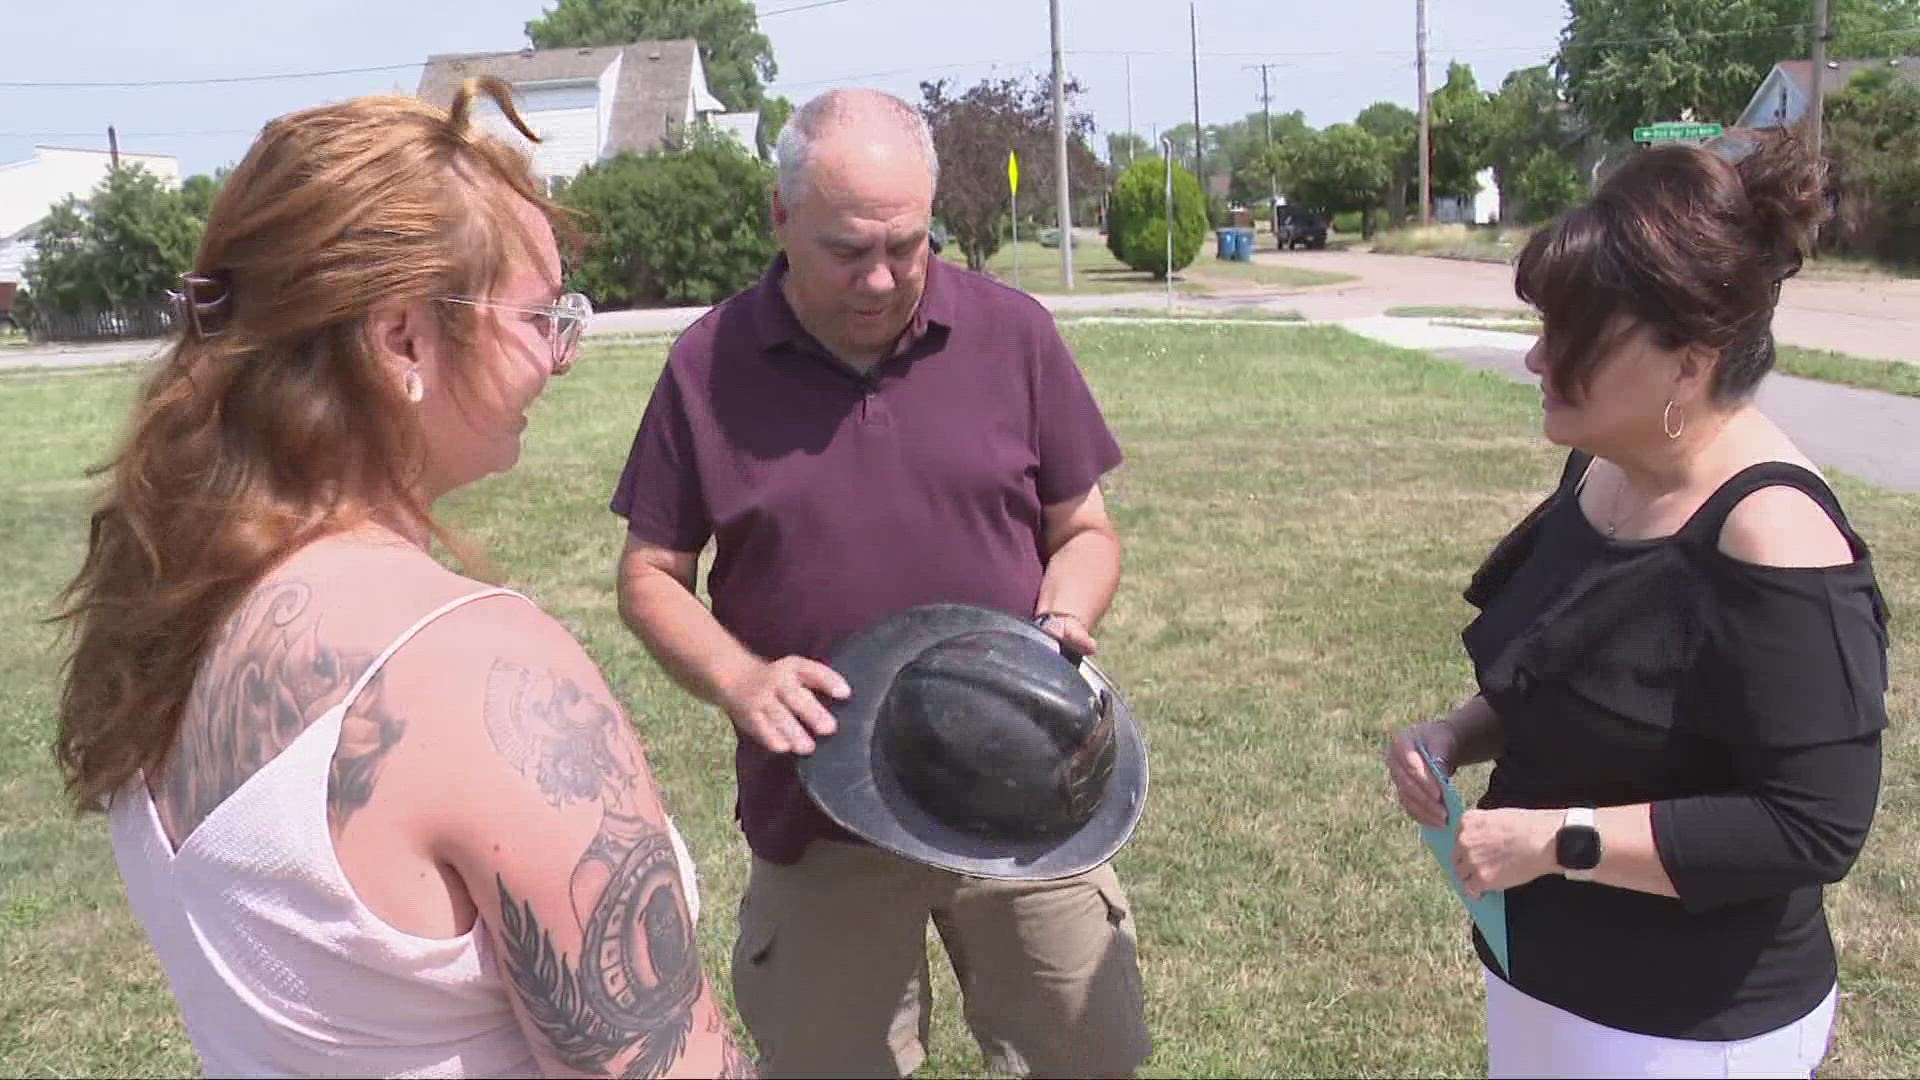 After the discovery of the helmet in the crawlspace of a Lorain home, the community and social media rallied together to find its rightful owner.